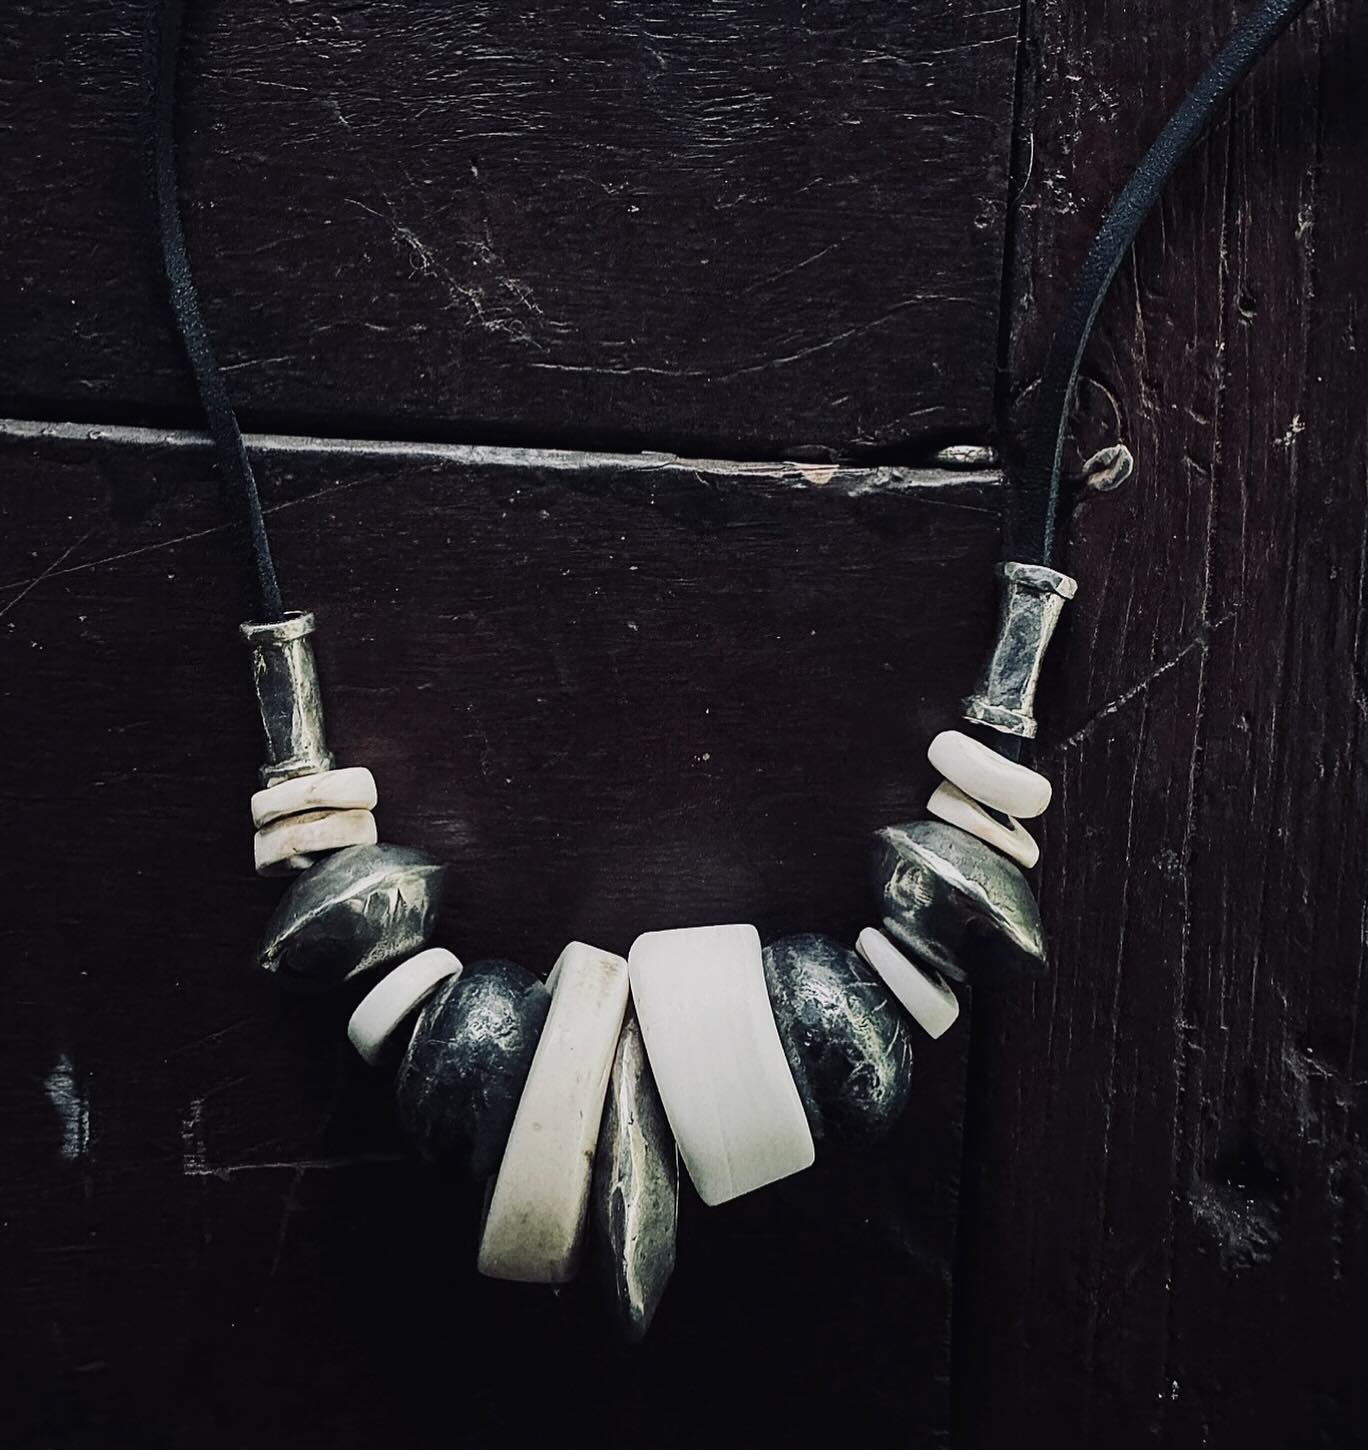 Perfectly Imperfect ~ Made up of well loved Shell Money from PNG + Chunky Silver. Bx #ewajewelry
:
:
:
:
#studioday #limitededition #oneofakindjewelry #jewelrycollection #jewelrydesigner #mystyle #raw #real #musthave #statementjewelry #womendesigning